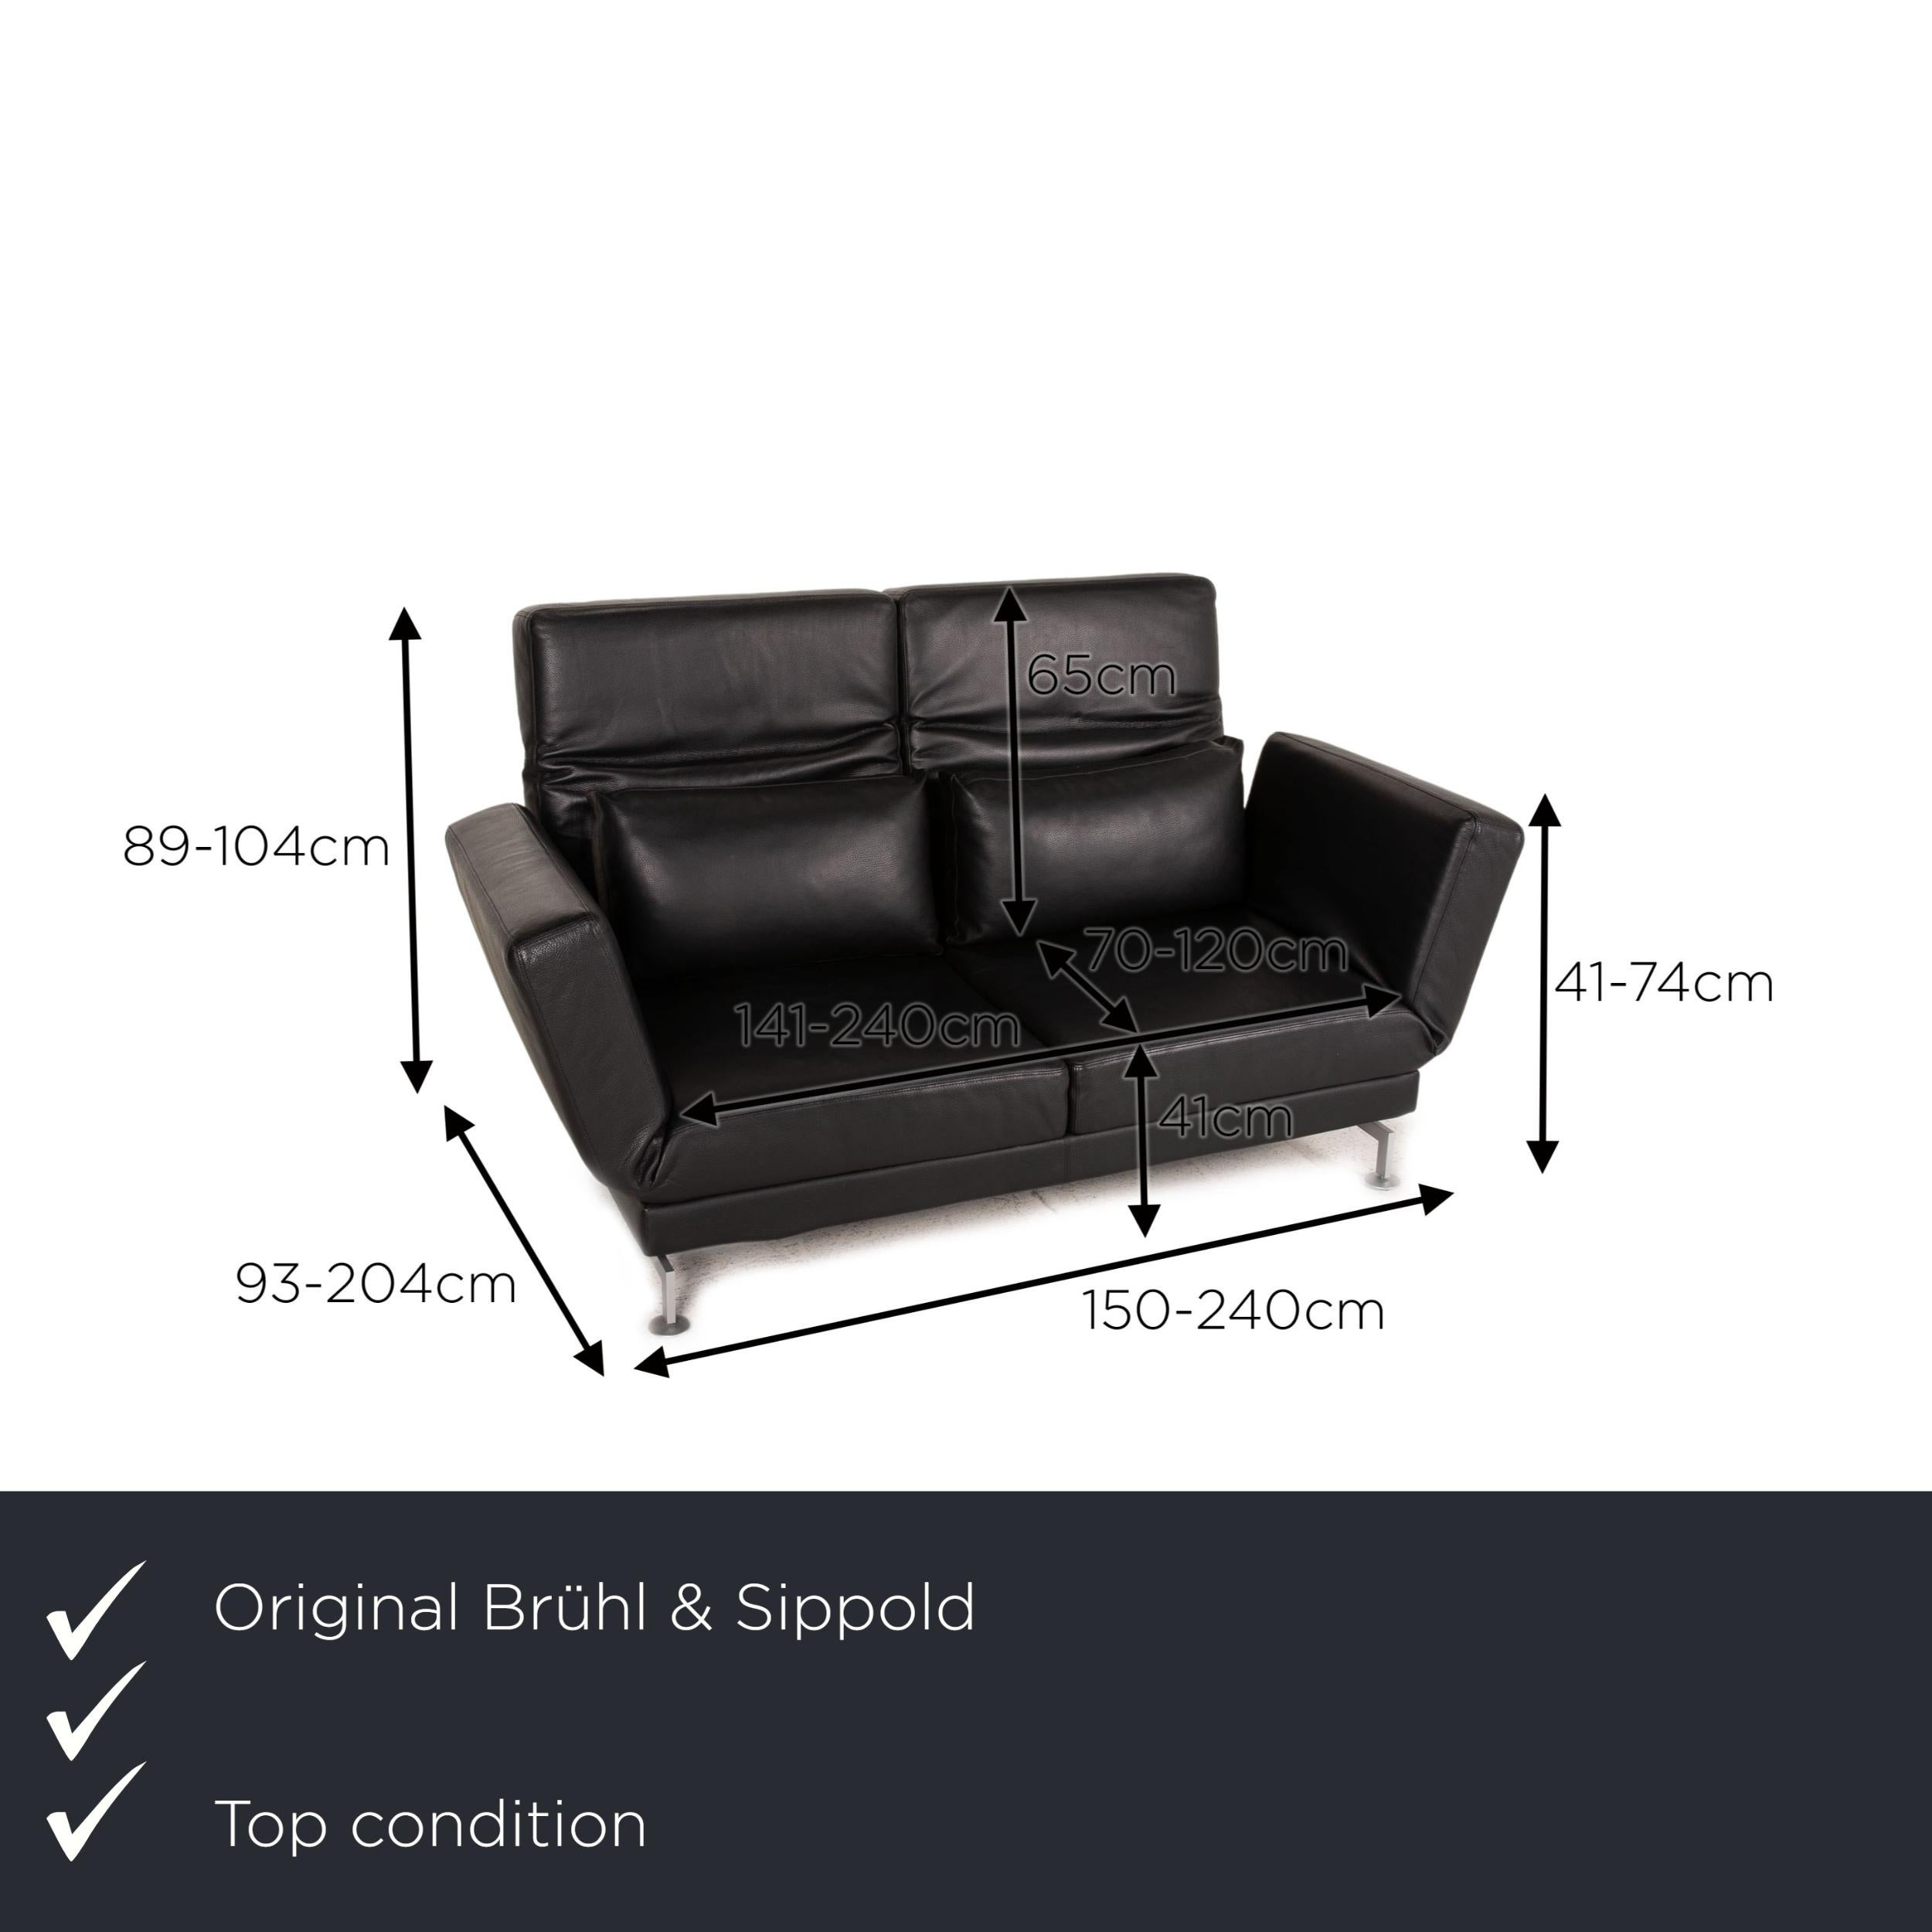 We present to you a Brühl & Sippold Moule leather sofa black two-seater couch function sleeping.
  
 

 Product measurements in centimeters:
 

 depth: 93
 width: 150
 height: 89
 seat height: 41
 rest height: 41
 seat depth: 70
 seat